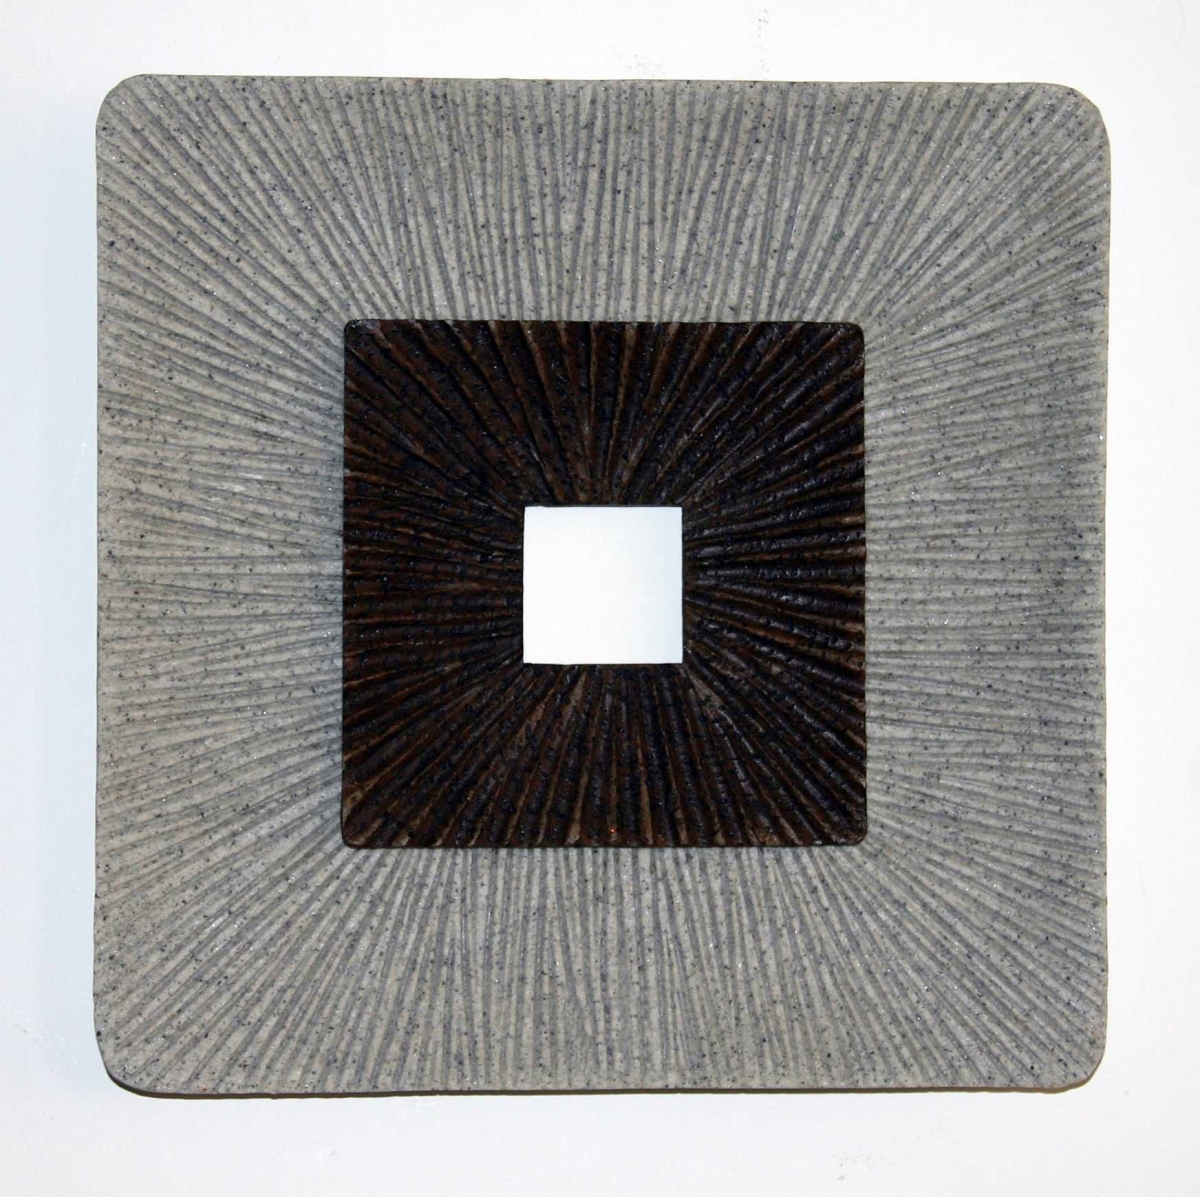 274775 19 X 2.36 In. Encaved Square Wall Art, Ribbed Finish